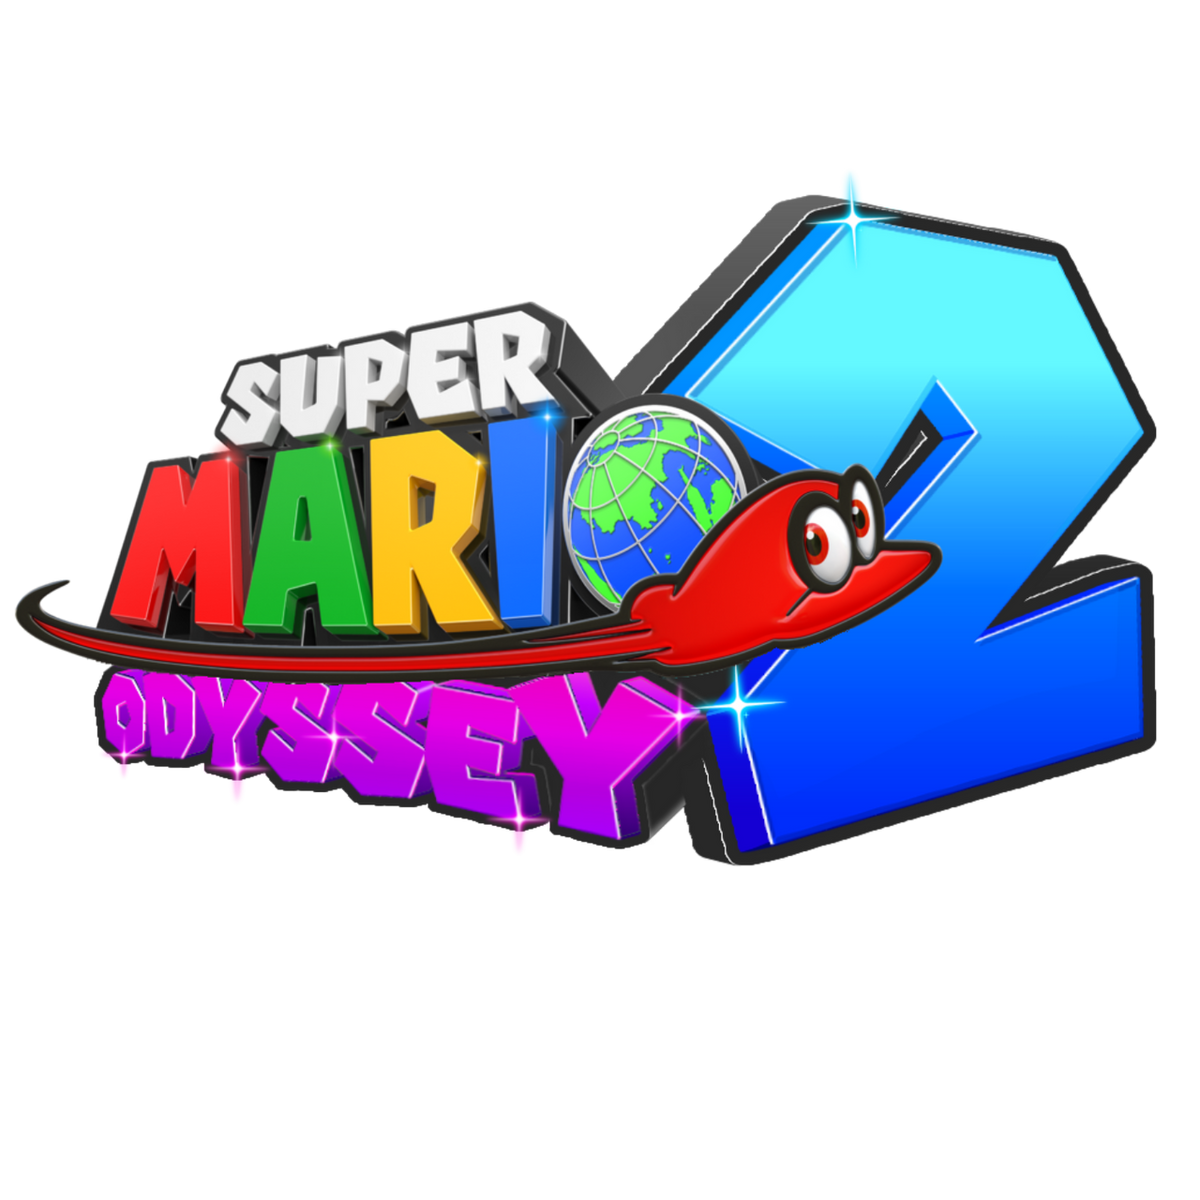 Gorgeous Super Mario Odyssey Mod Adds Multiplayer Features